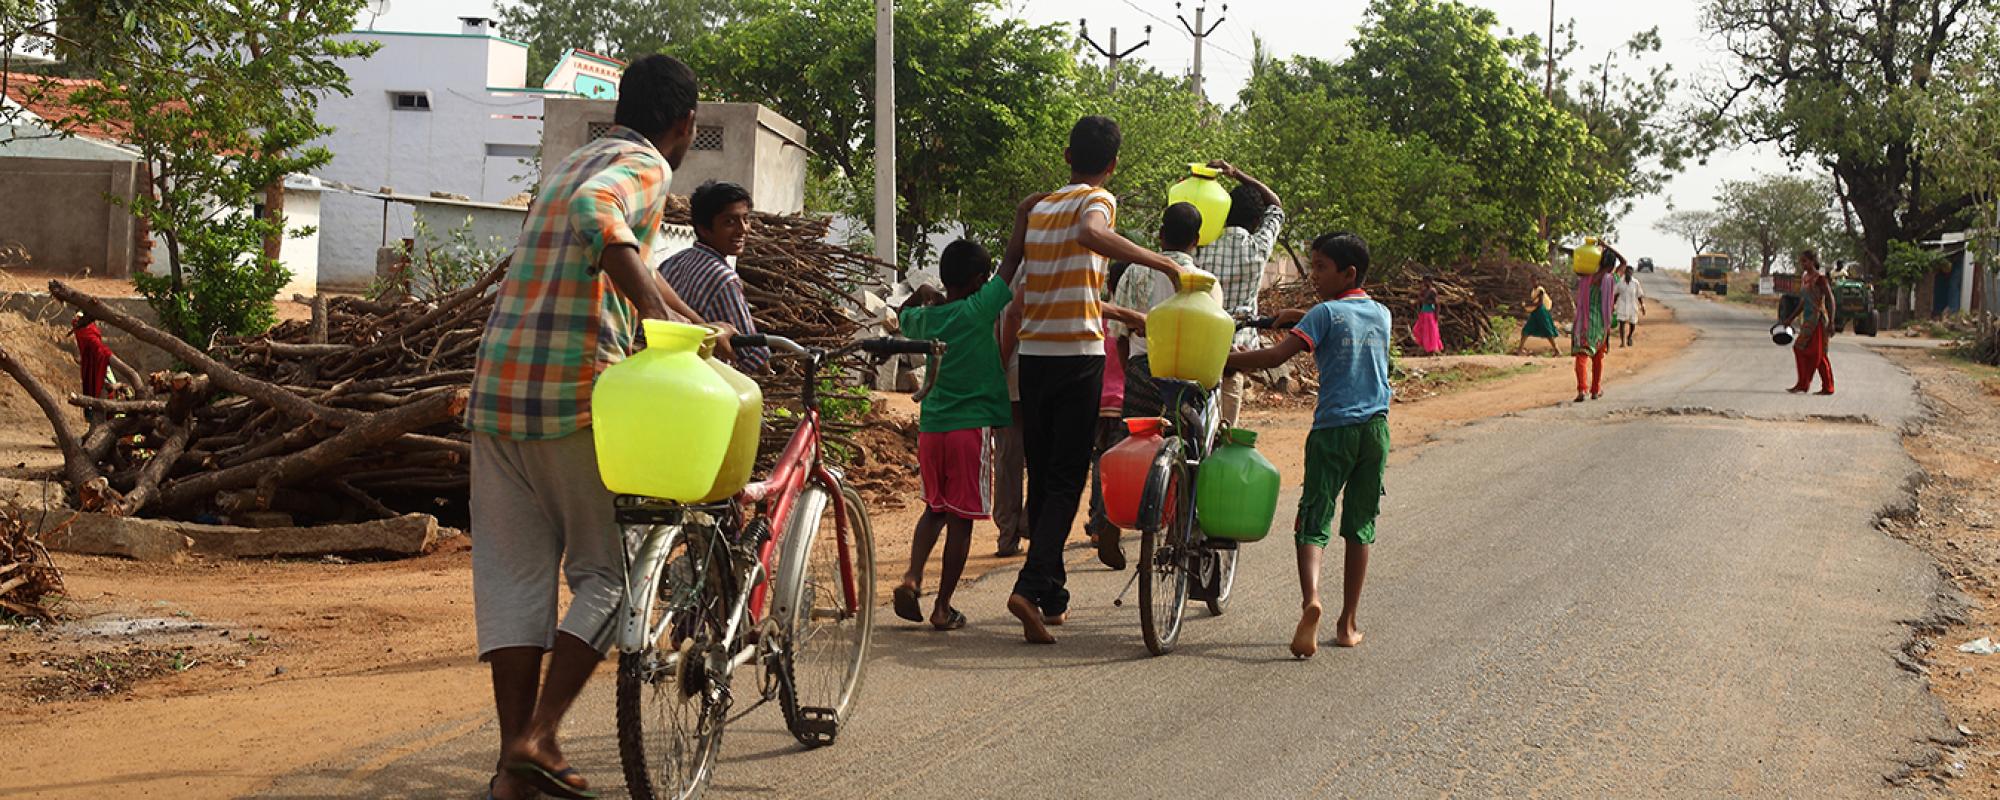 men walking down a road with bikes full of water cans